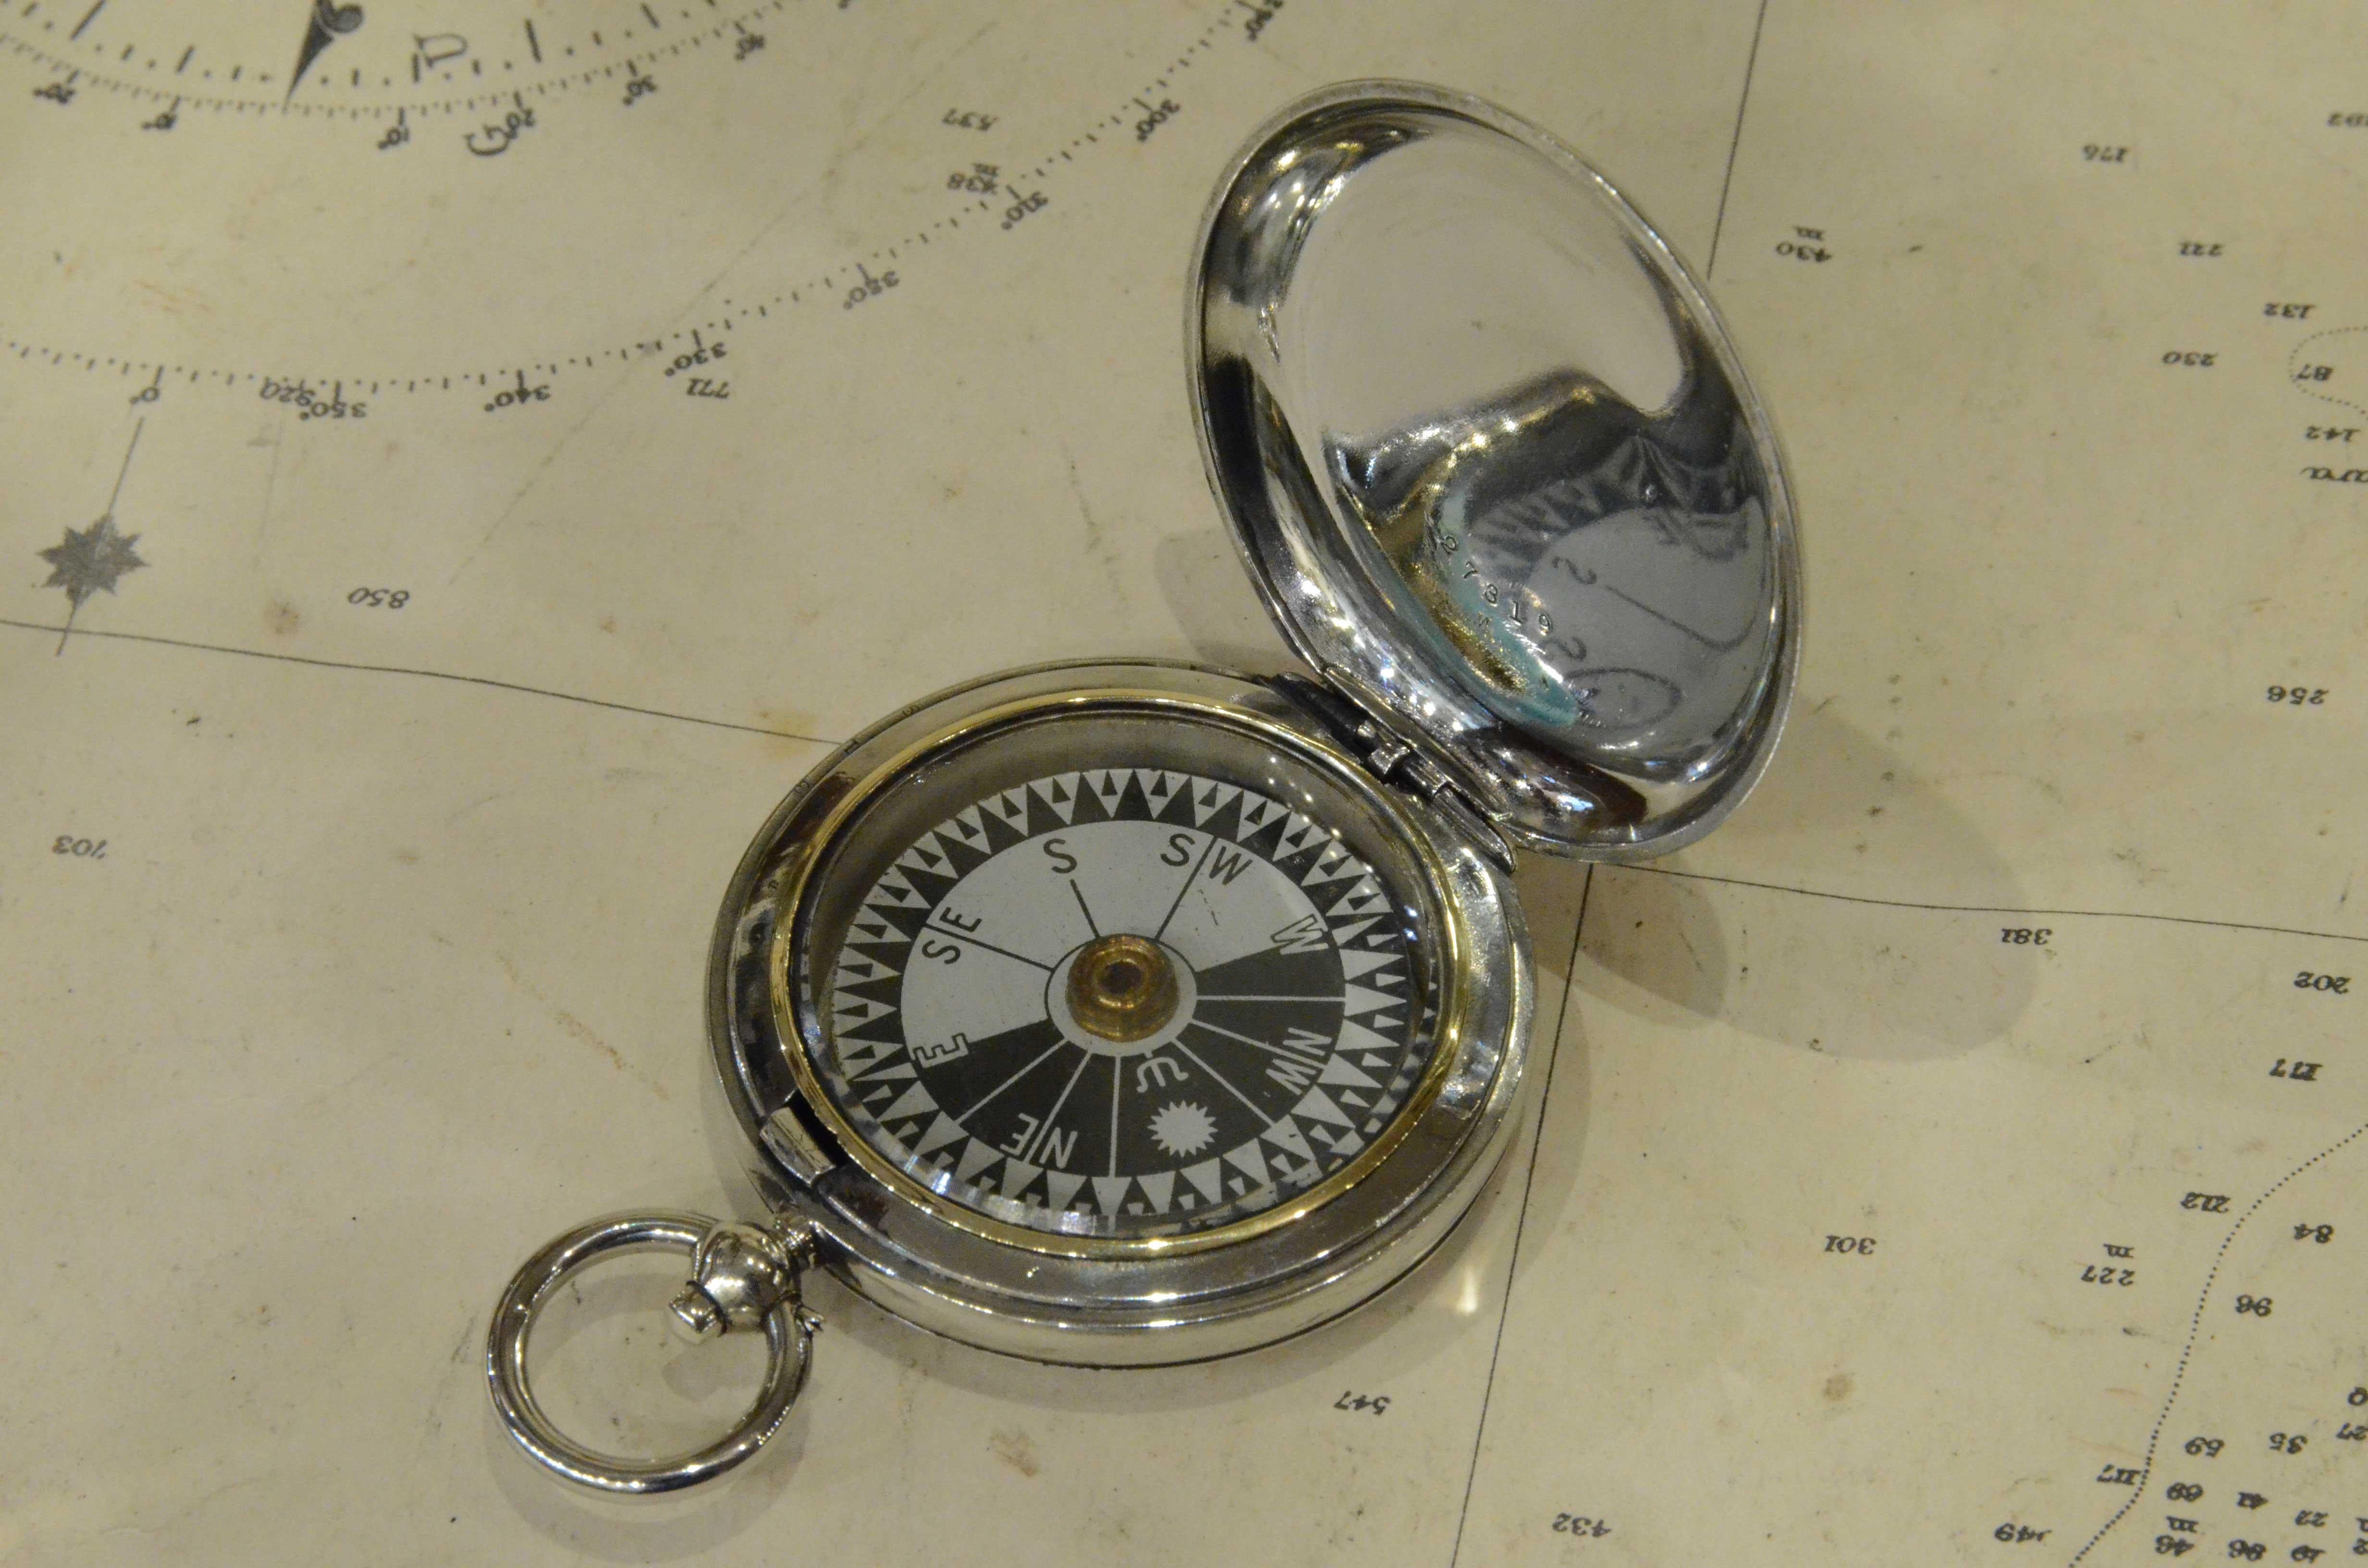 Pocket compass for the RAF officers, signed F. Darton & Co London V n. 77824 1916 made of brass chrome in the shape of a pocket watch. The compass has a snap-on cover with release button inside the ring. 
Twelve-winds compass card. Very good